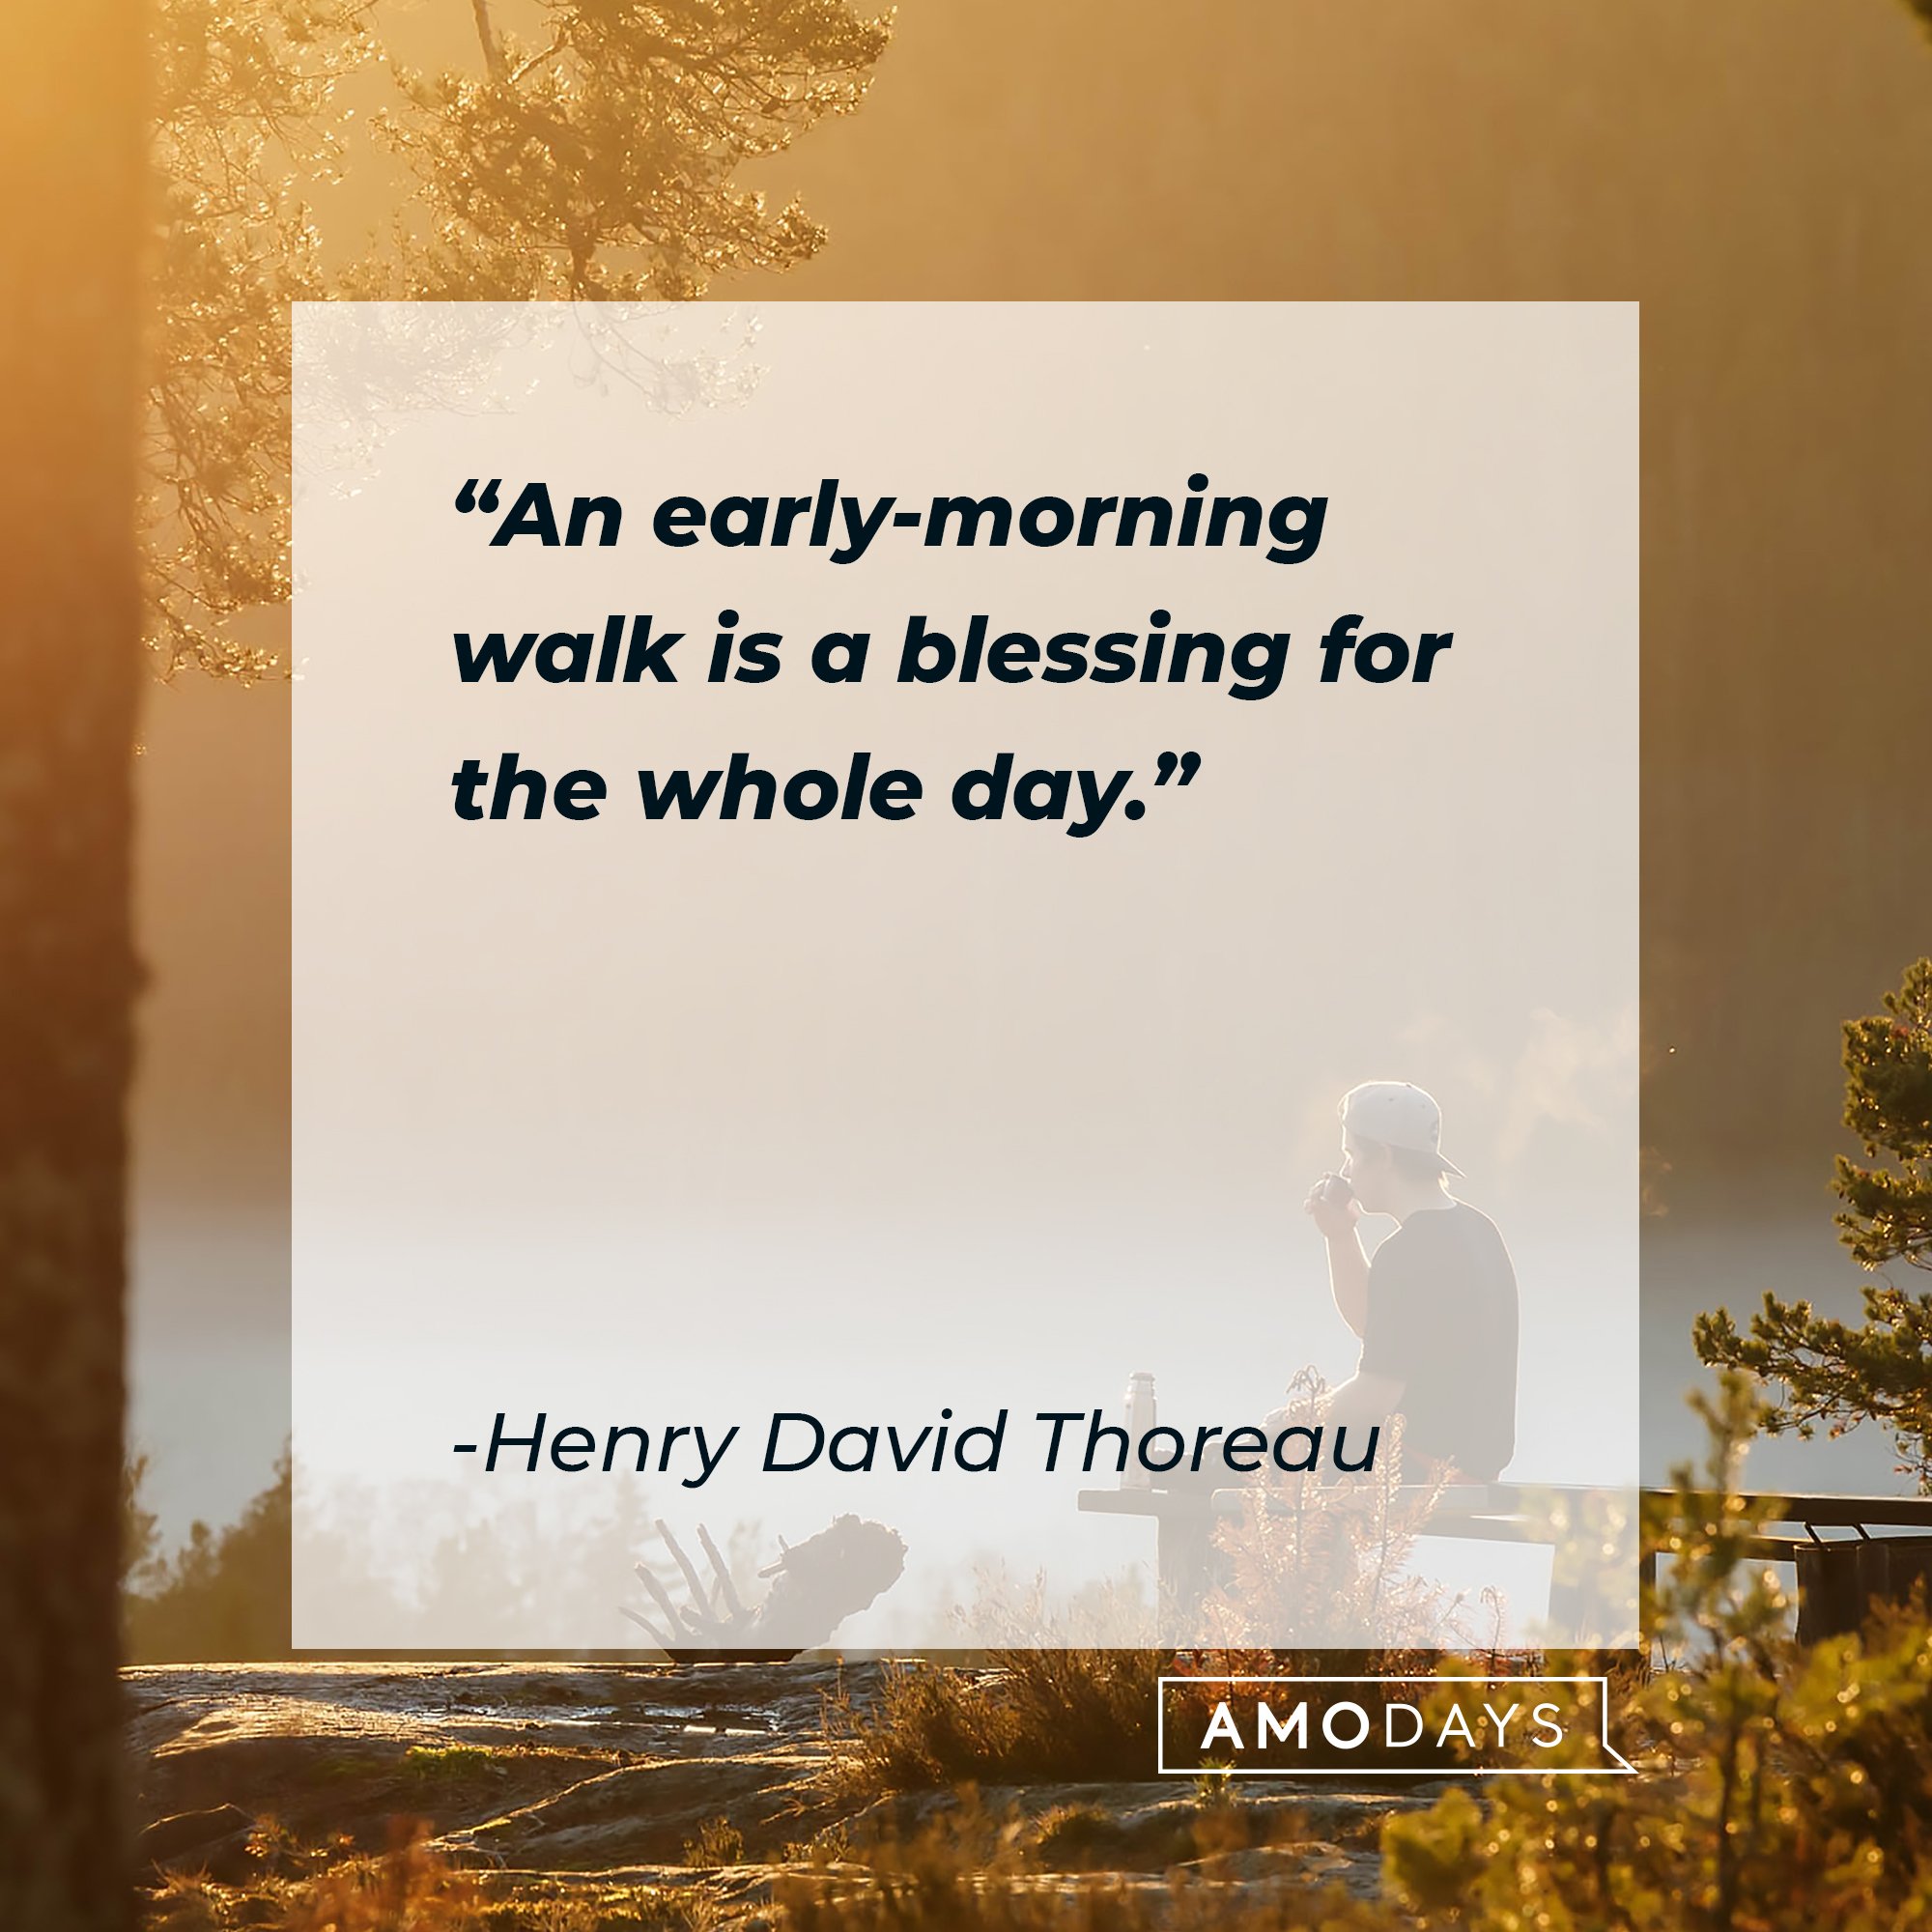 Henry David Thoreau’s quote: "An early-morning walk is a blessing for the whole day." | Image: AmoDays 